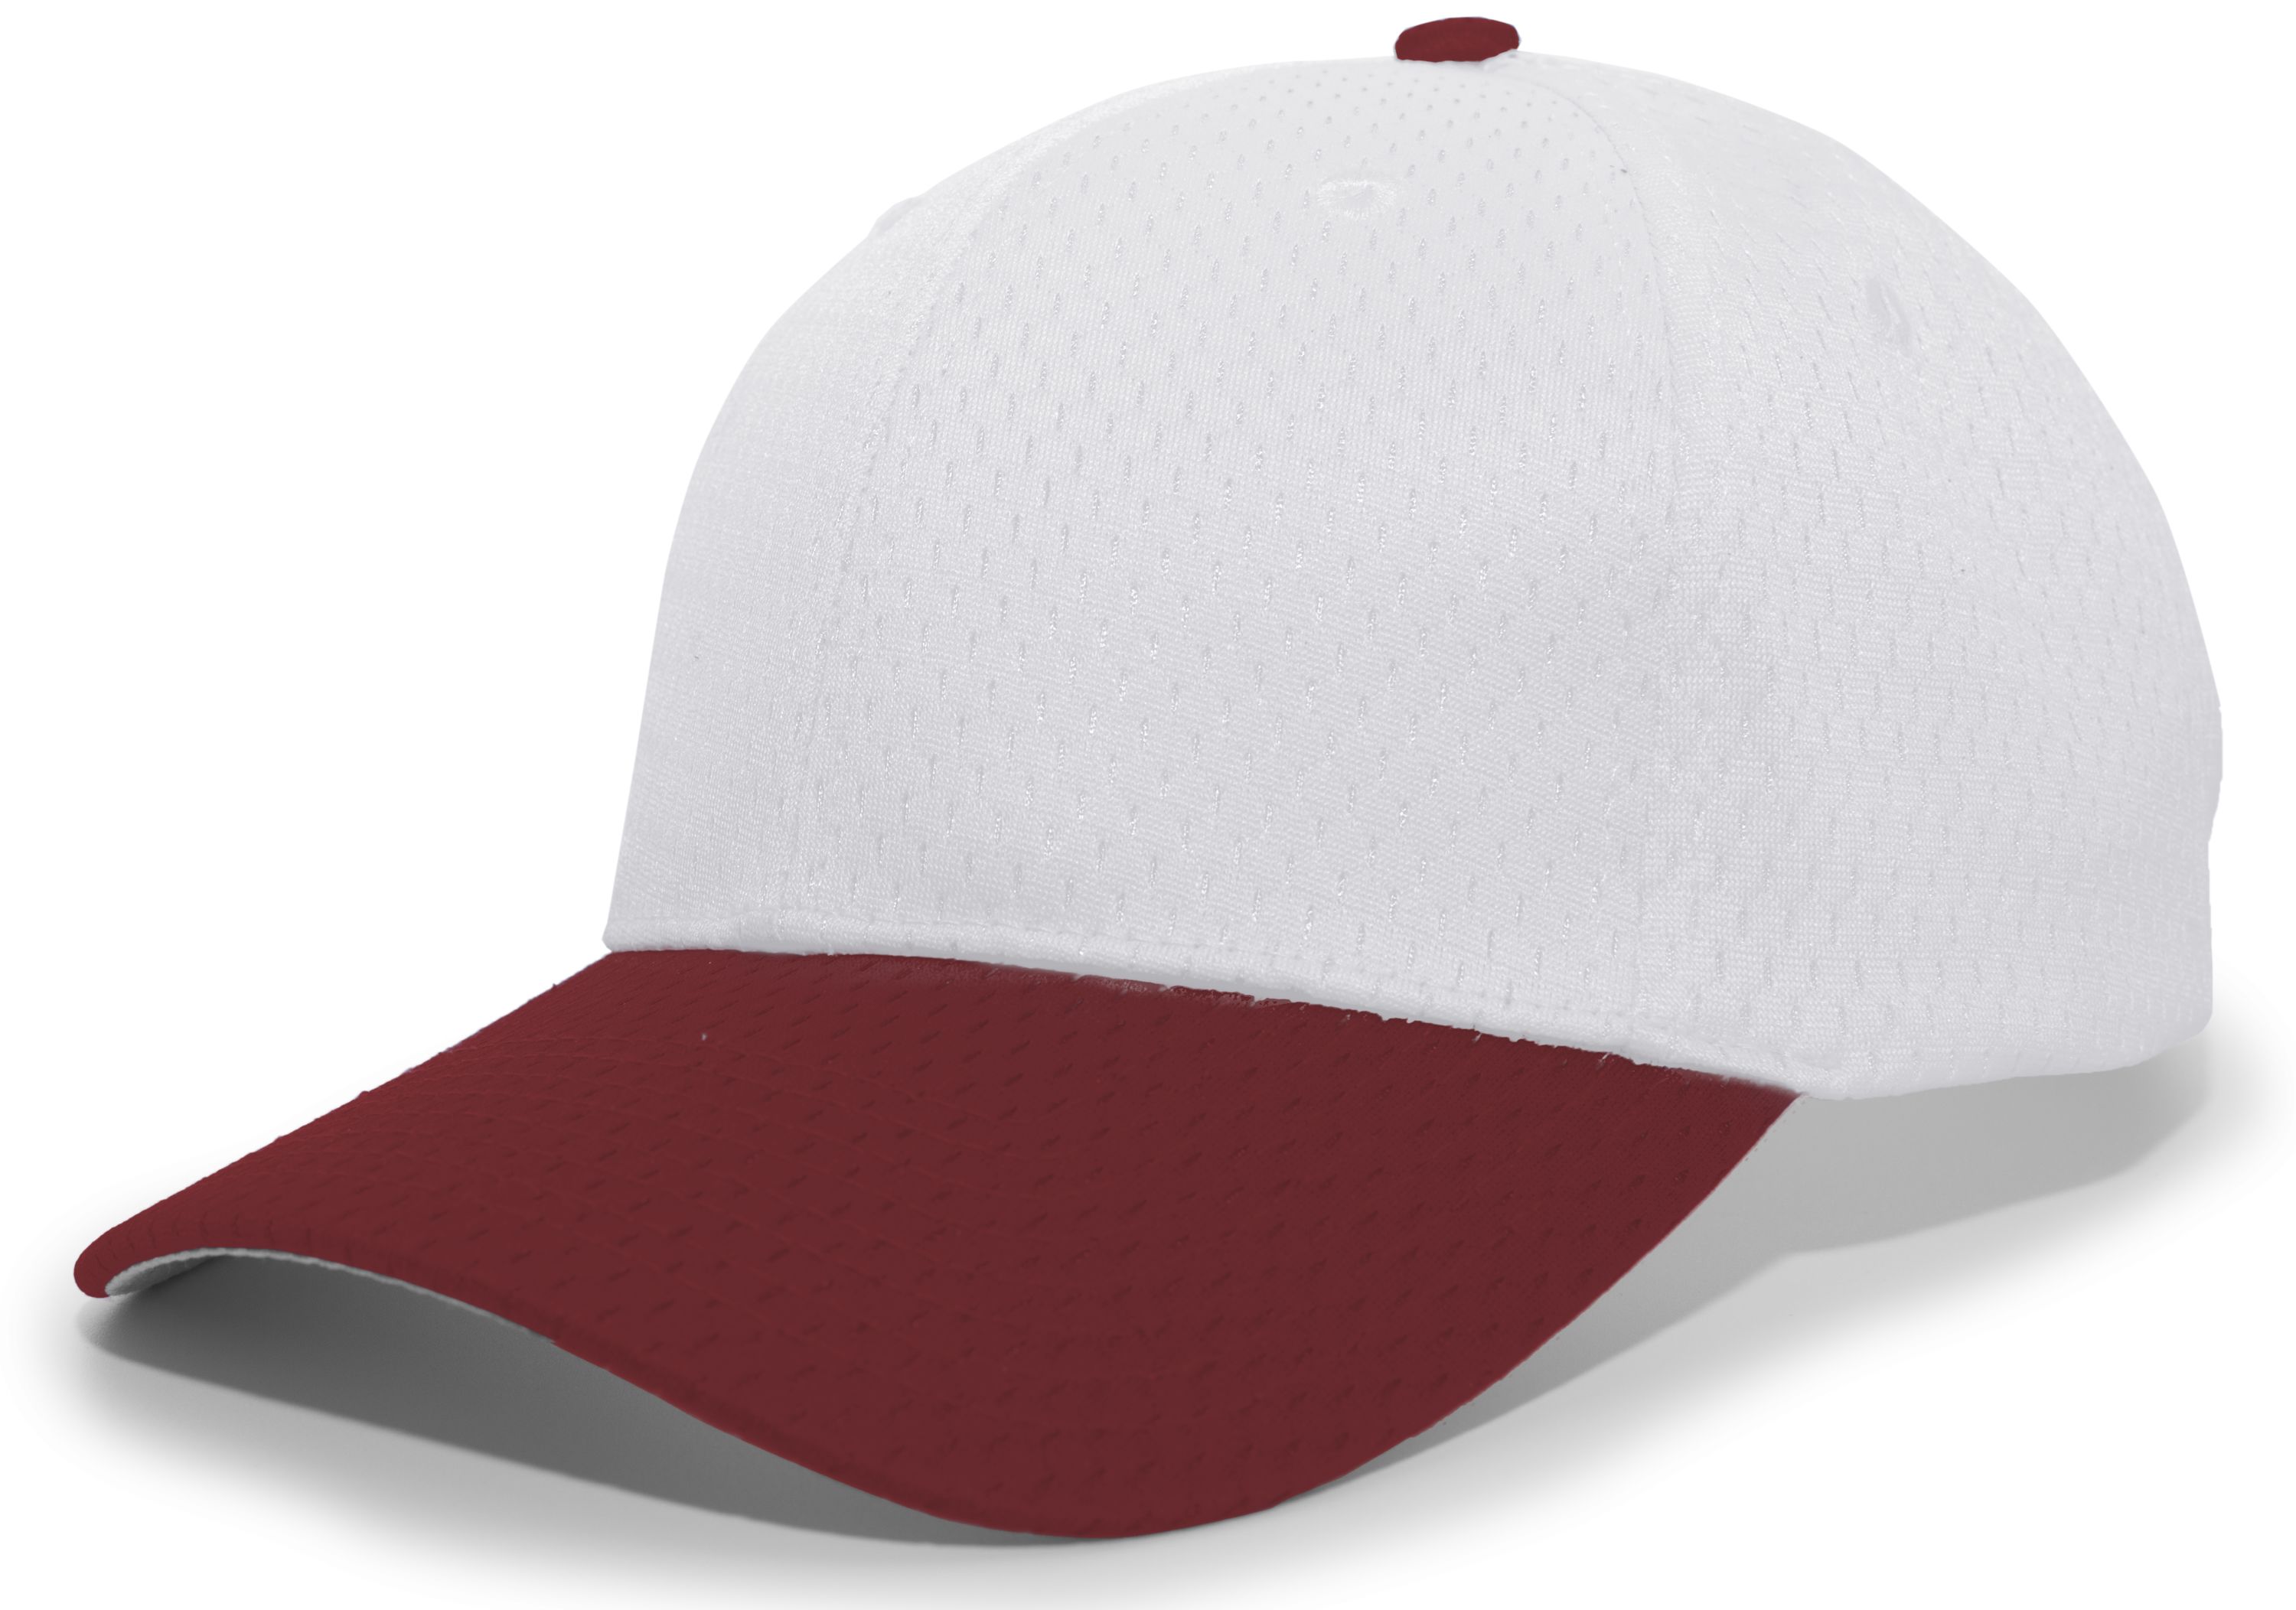 click to view Silver/Maroon